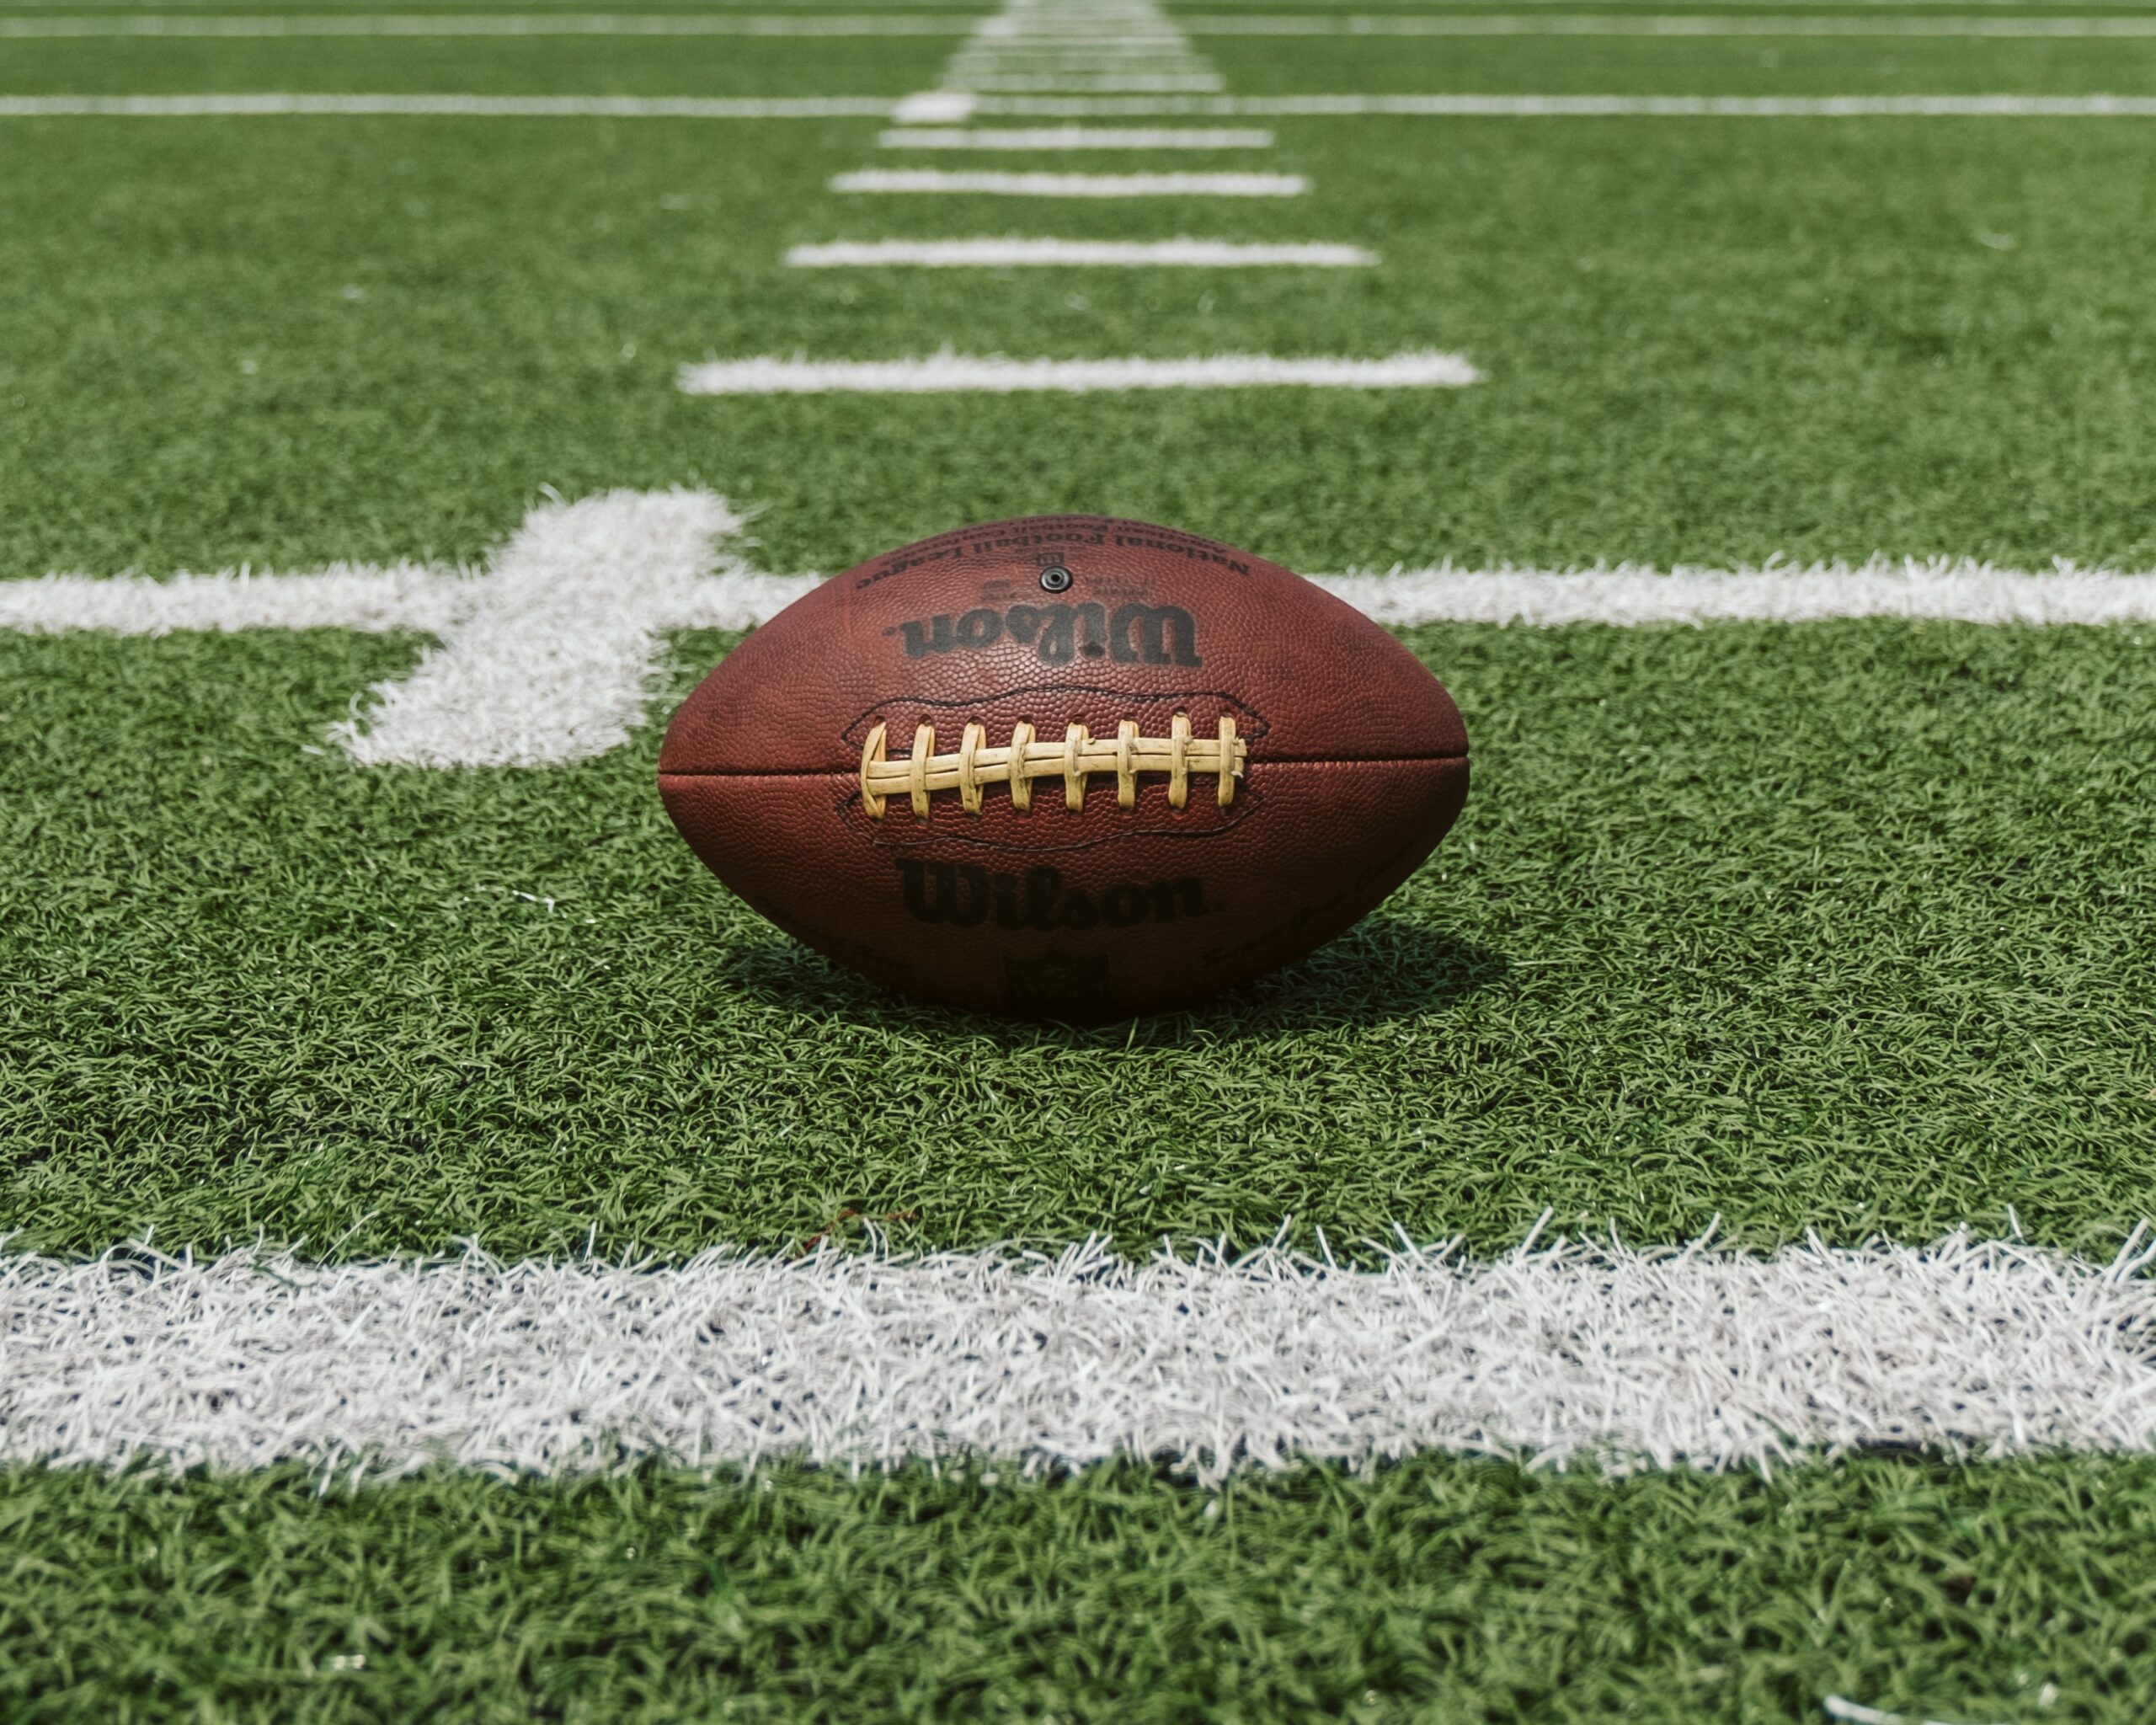 This is a photo of a football sitting in the middle of an empty football field.